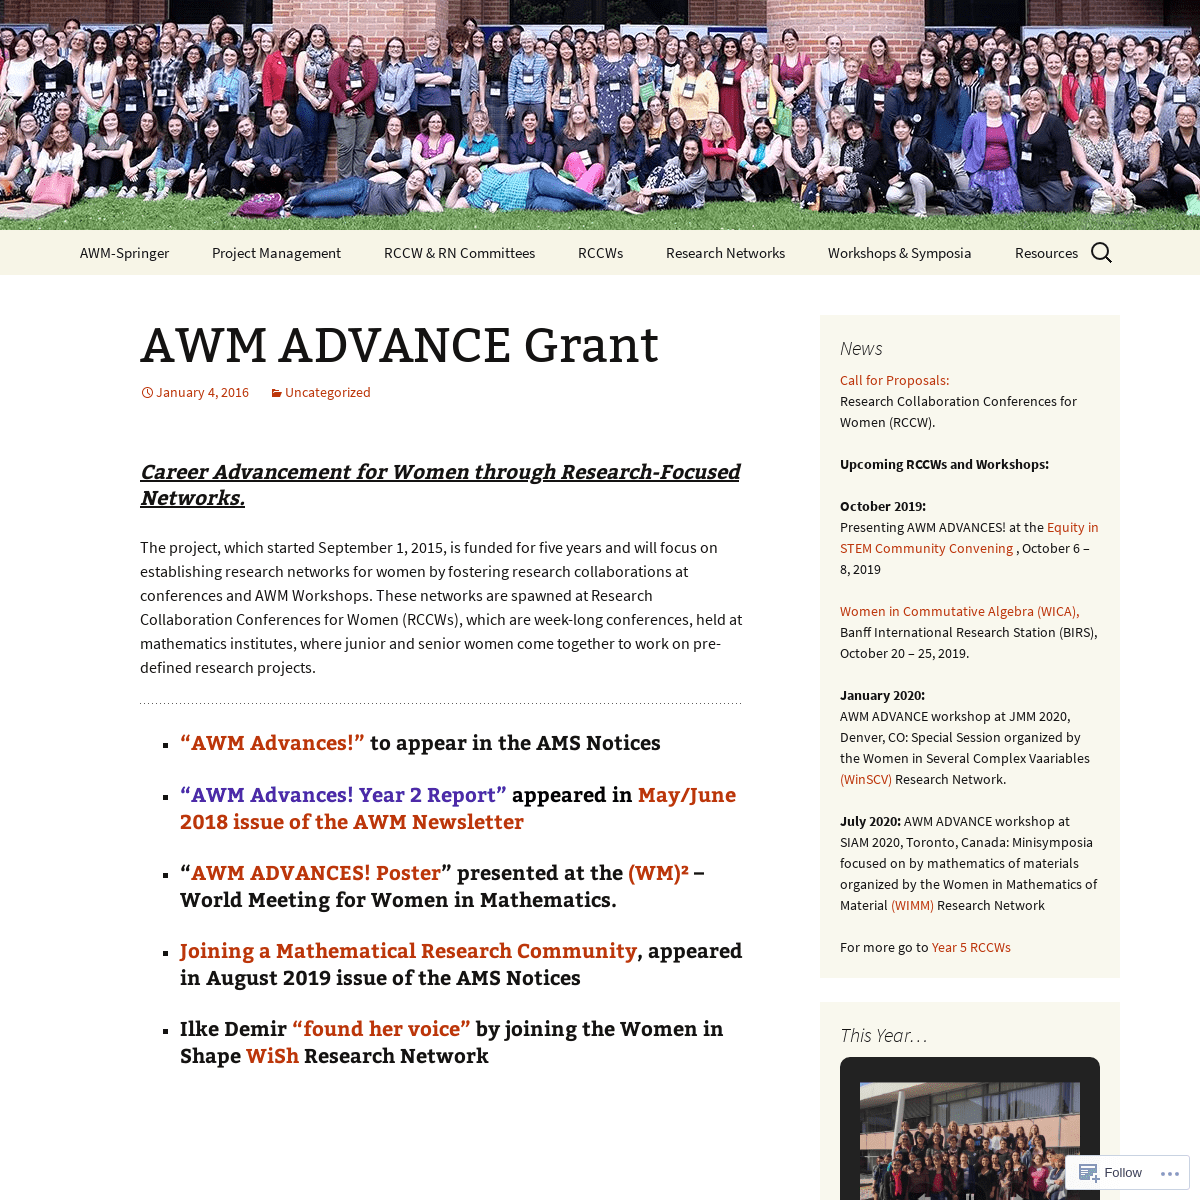 A complete backup of awmadvance.org